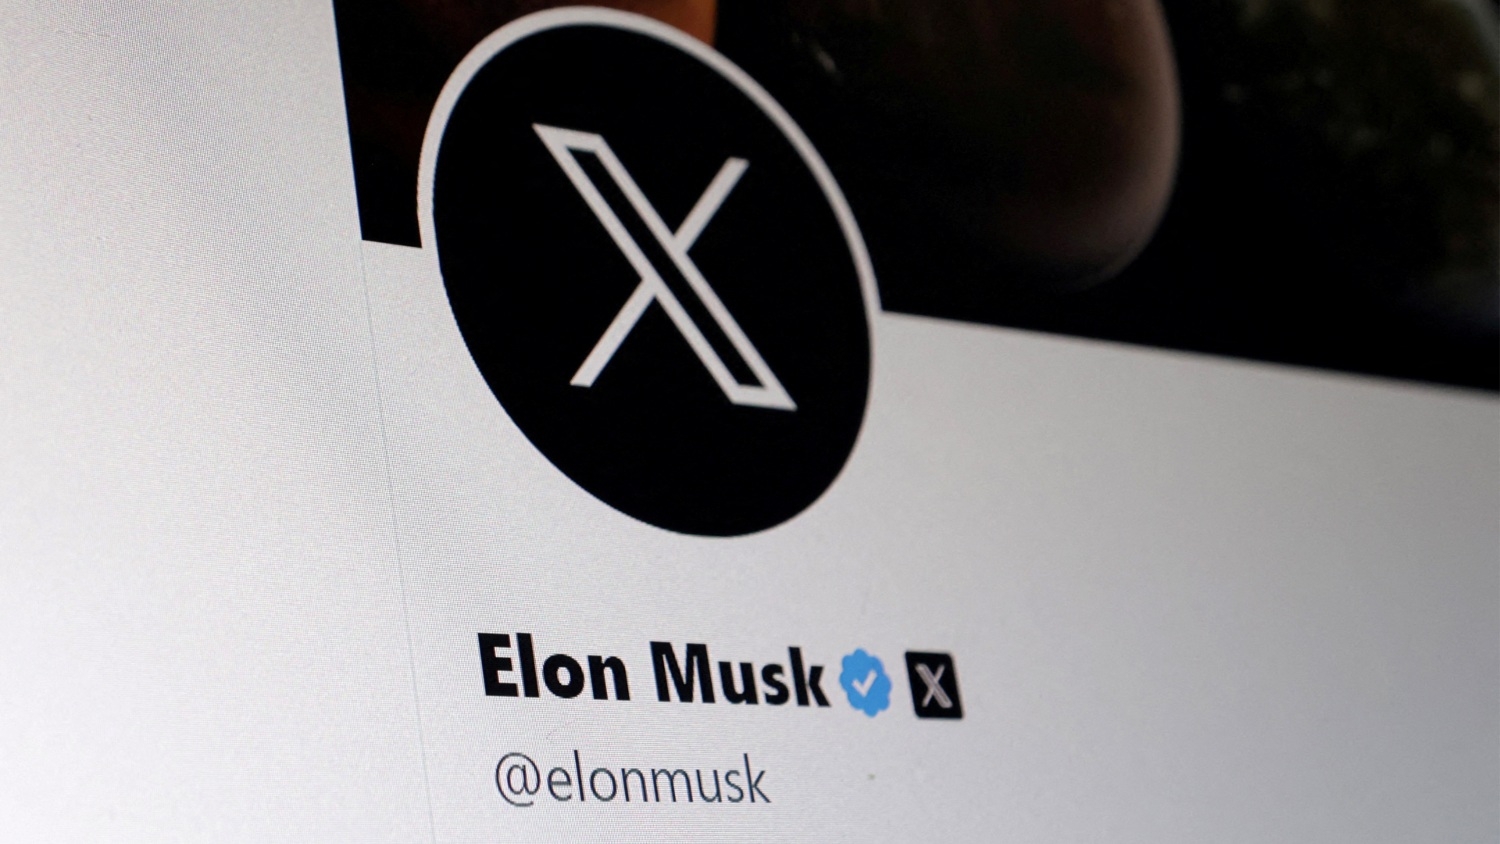 A study in March found that there was a surge of new accounts created after Musk took over that posted at least some antisemitic content.